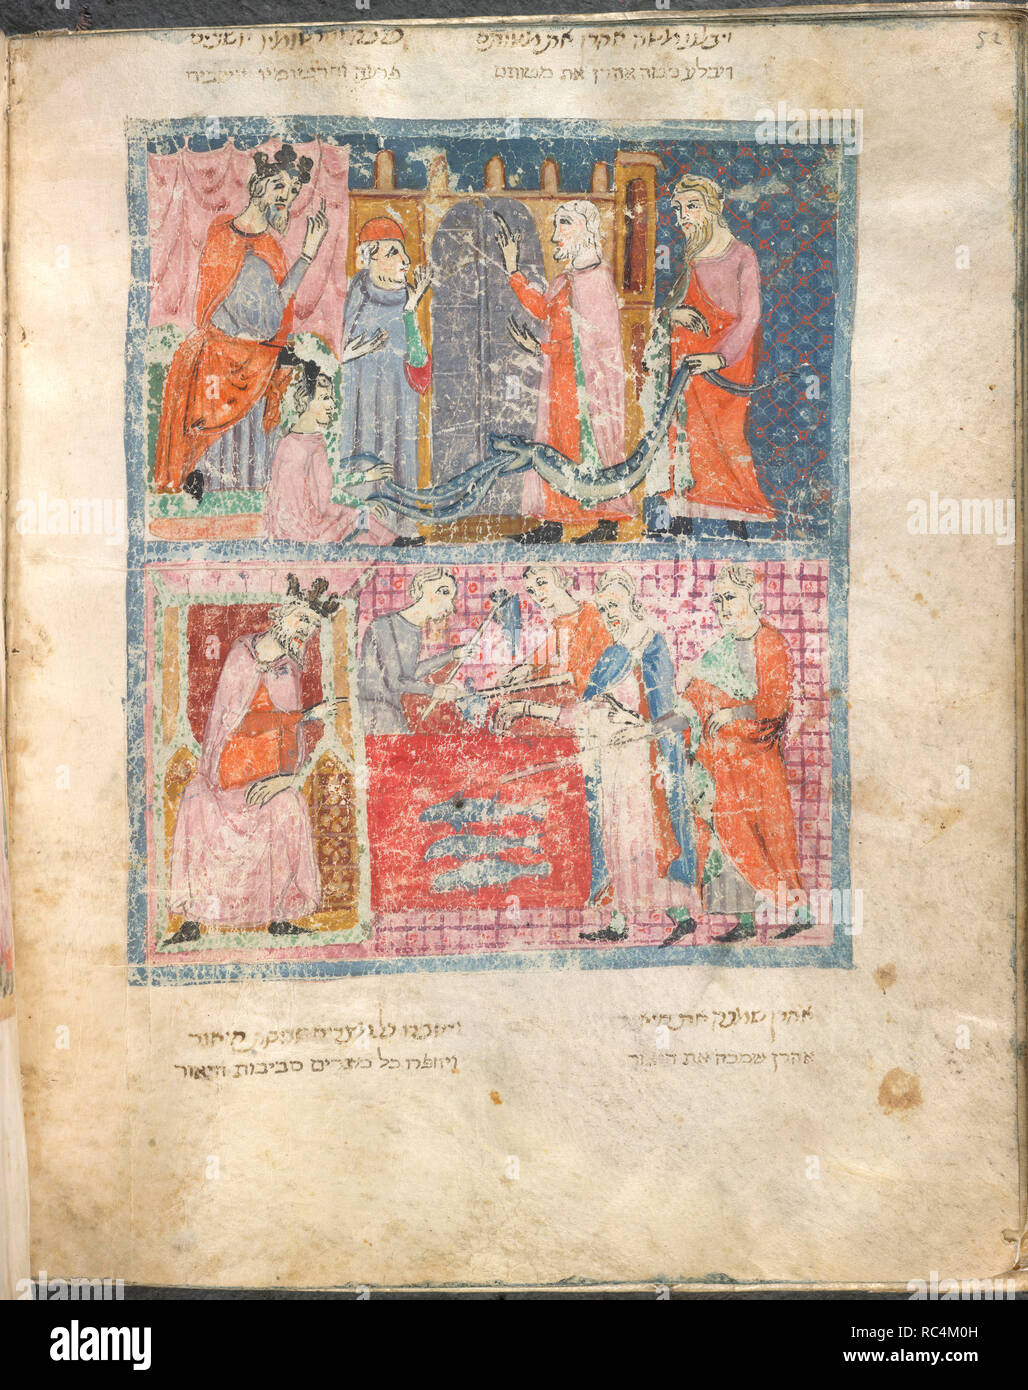 Moses and Aaron before Pharoah, Aaron's rod turns into a serpent; Moses turns the water into blood. Image taken from Sister Haggadah. Originally published/produced in Catalonia, mid 14th century. Museum: BRITISH LIBRARY. Stock Photo